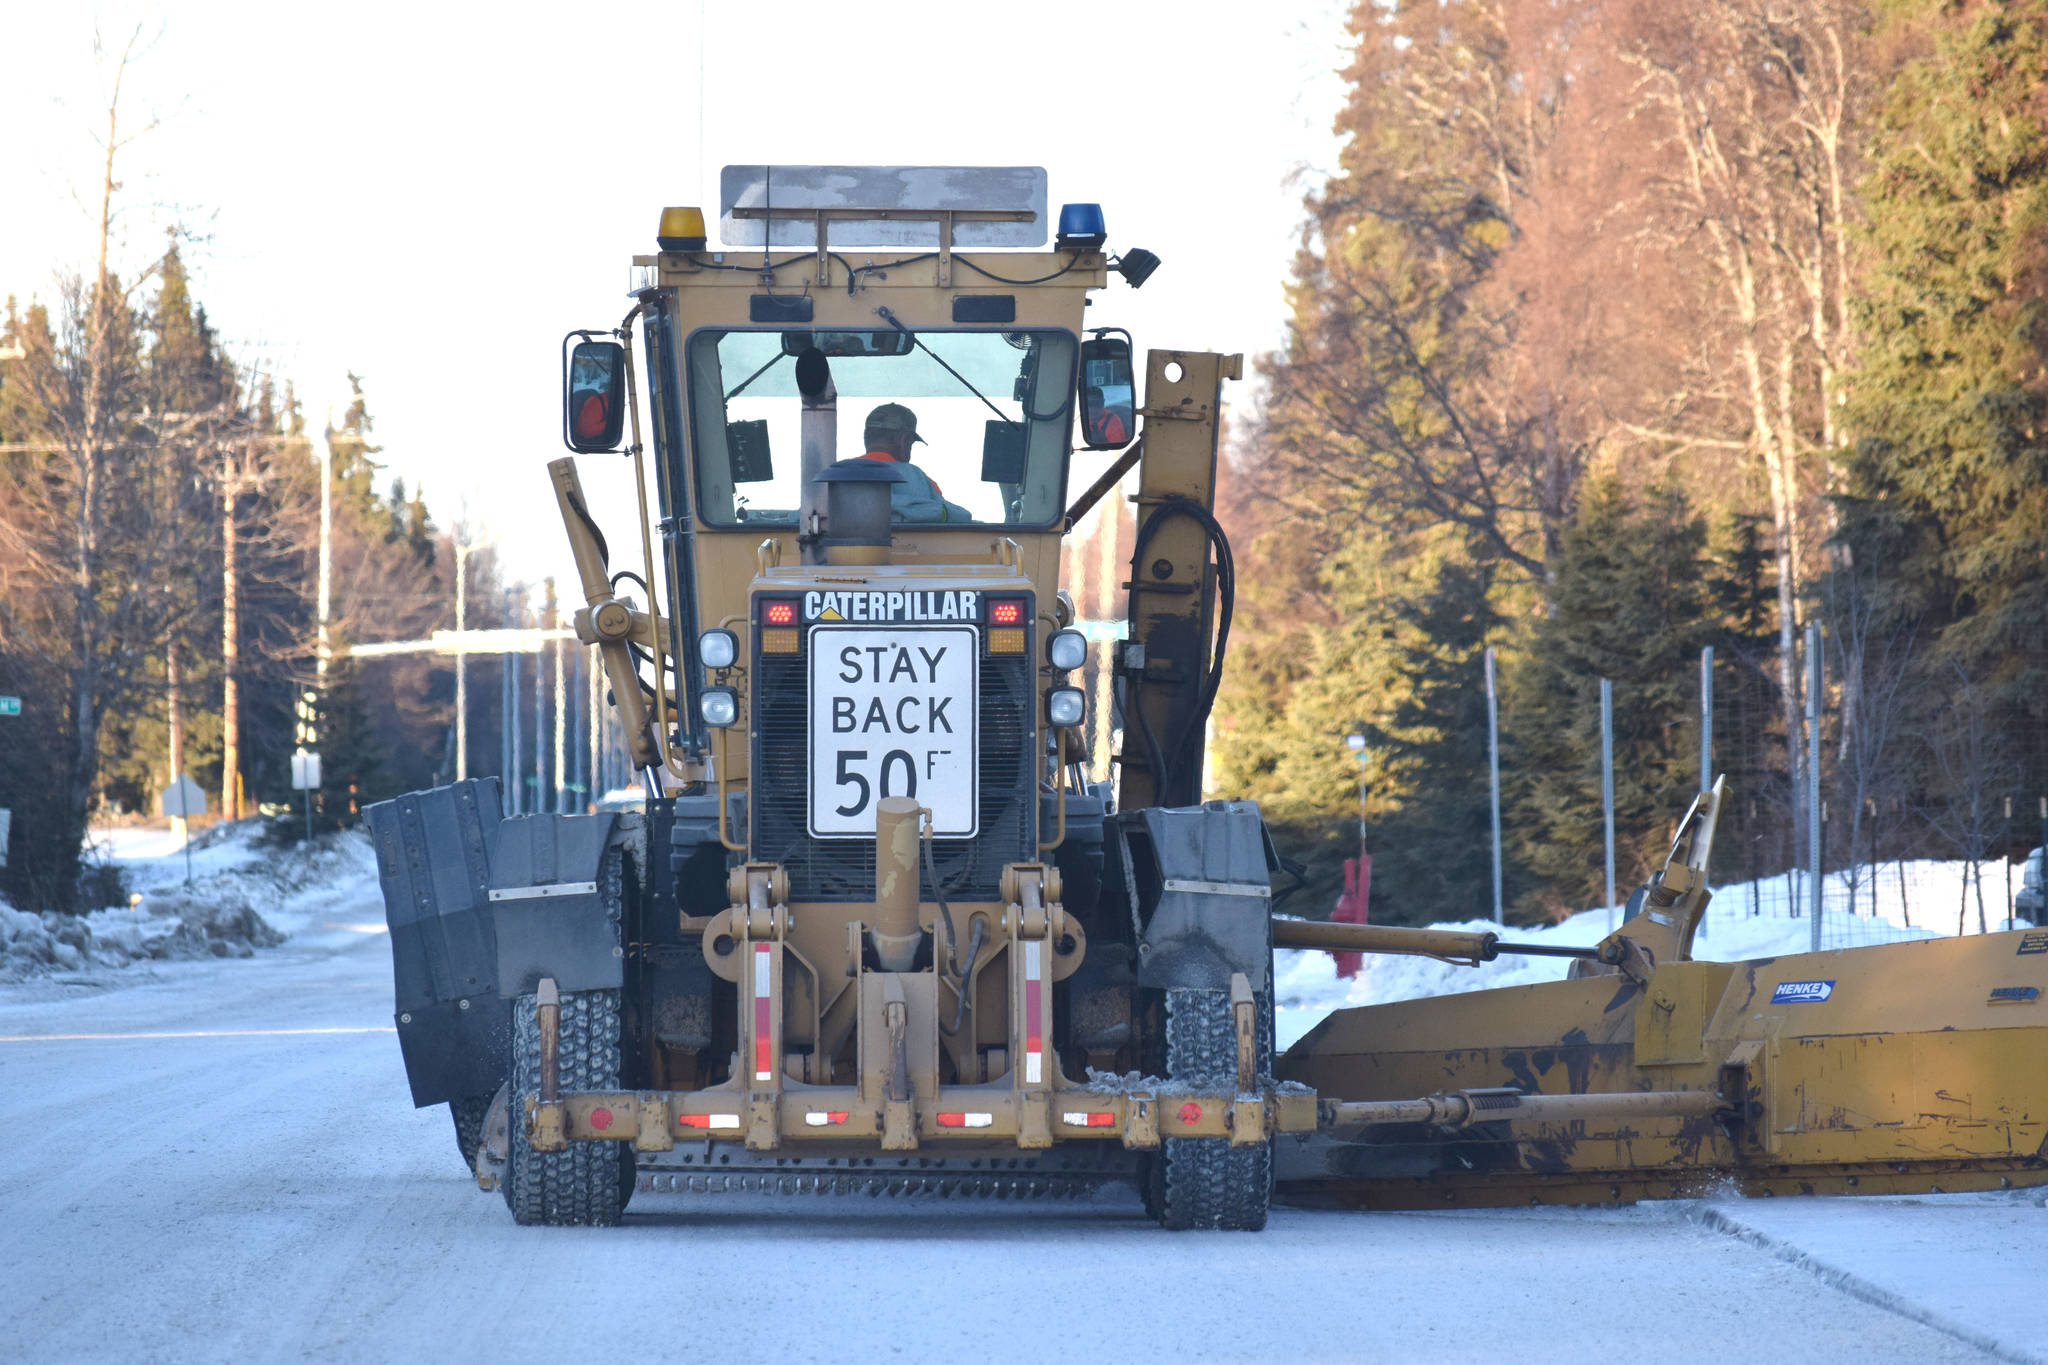 A contractor plows snow down Forest Drive in Kenai on Jan. 17, 2019. (Photo by Brian Mazurek/Peninsula Clarion)